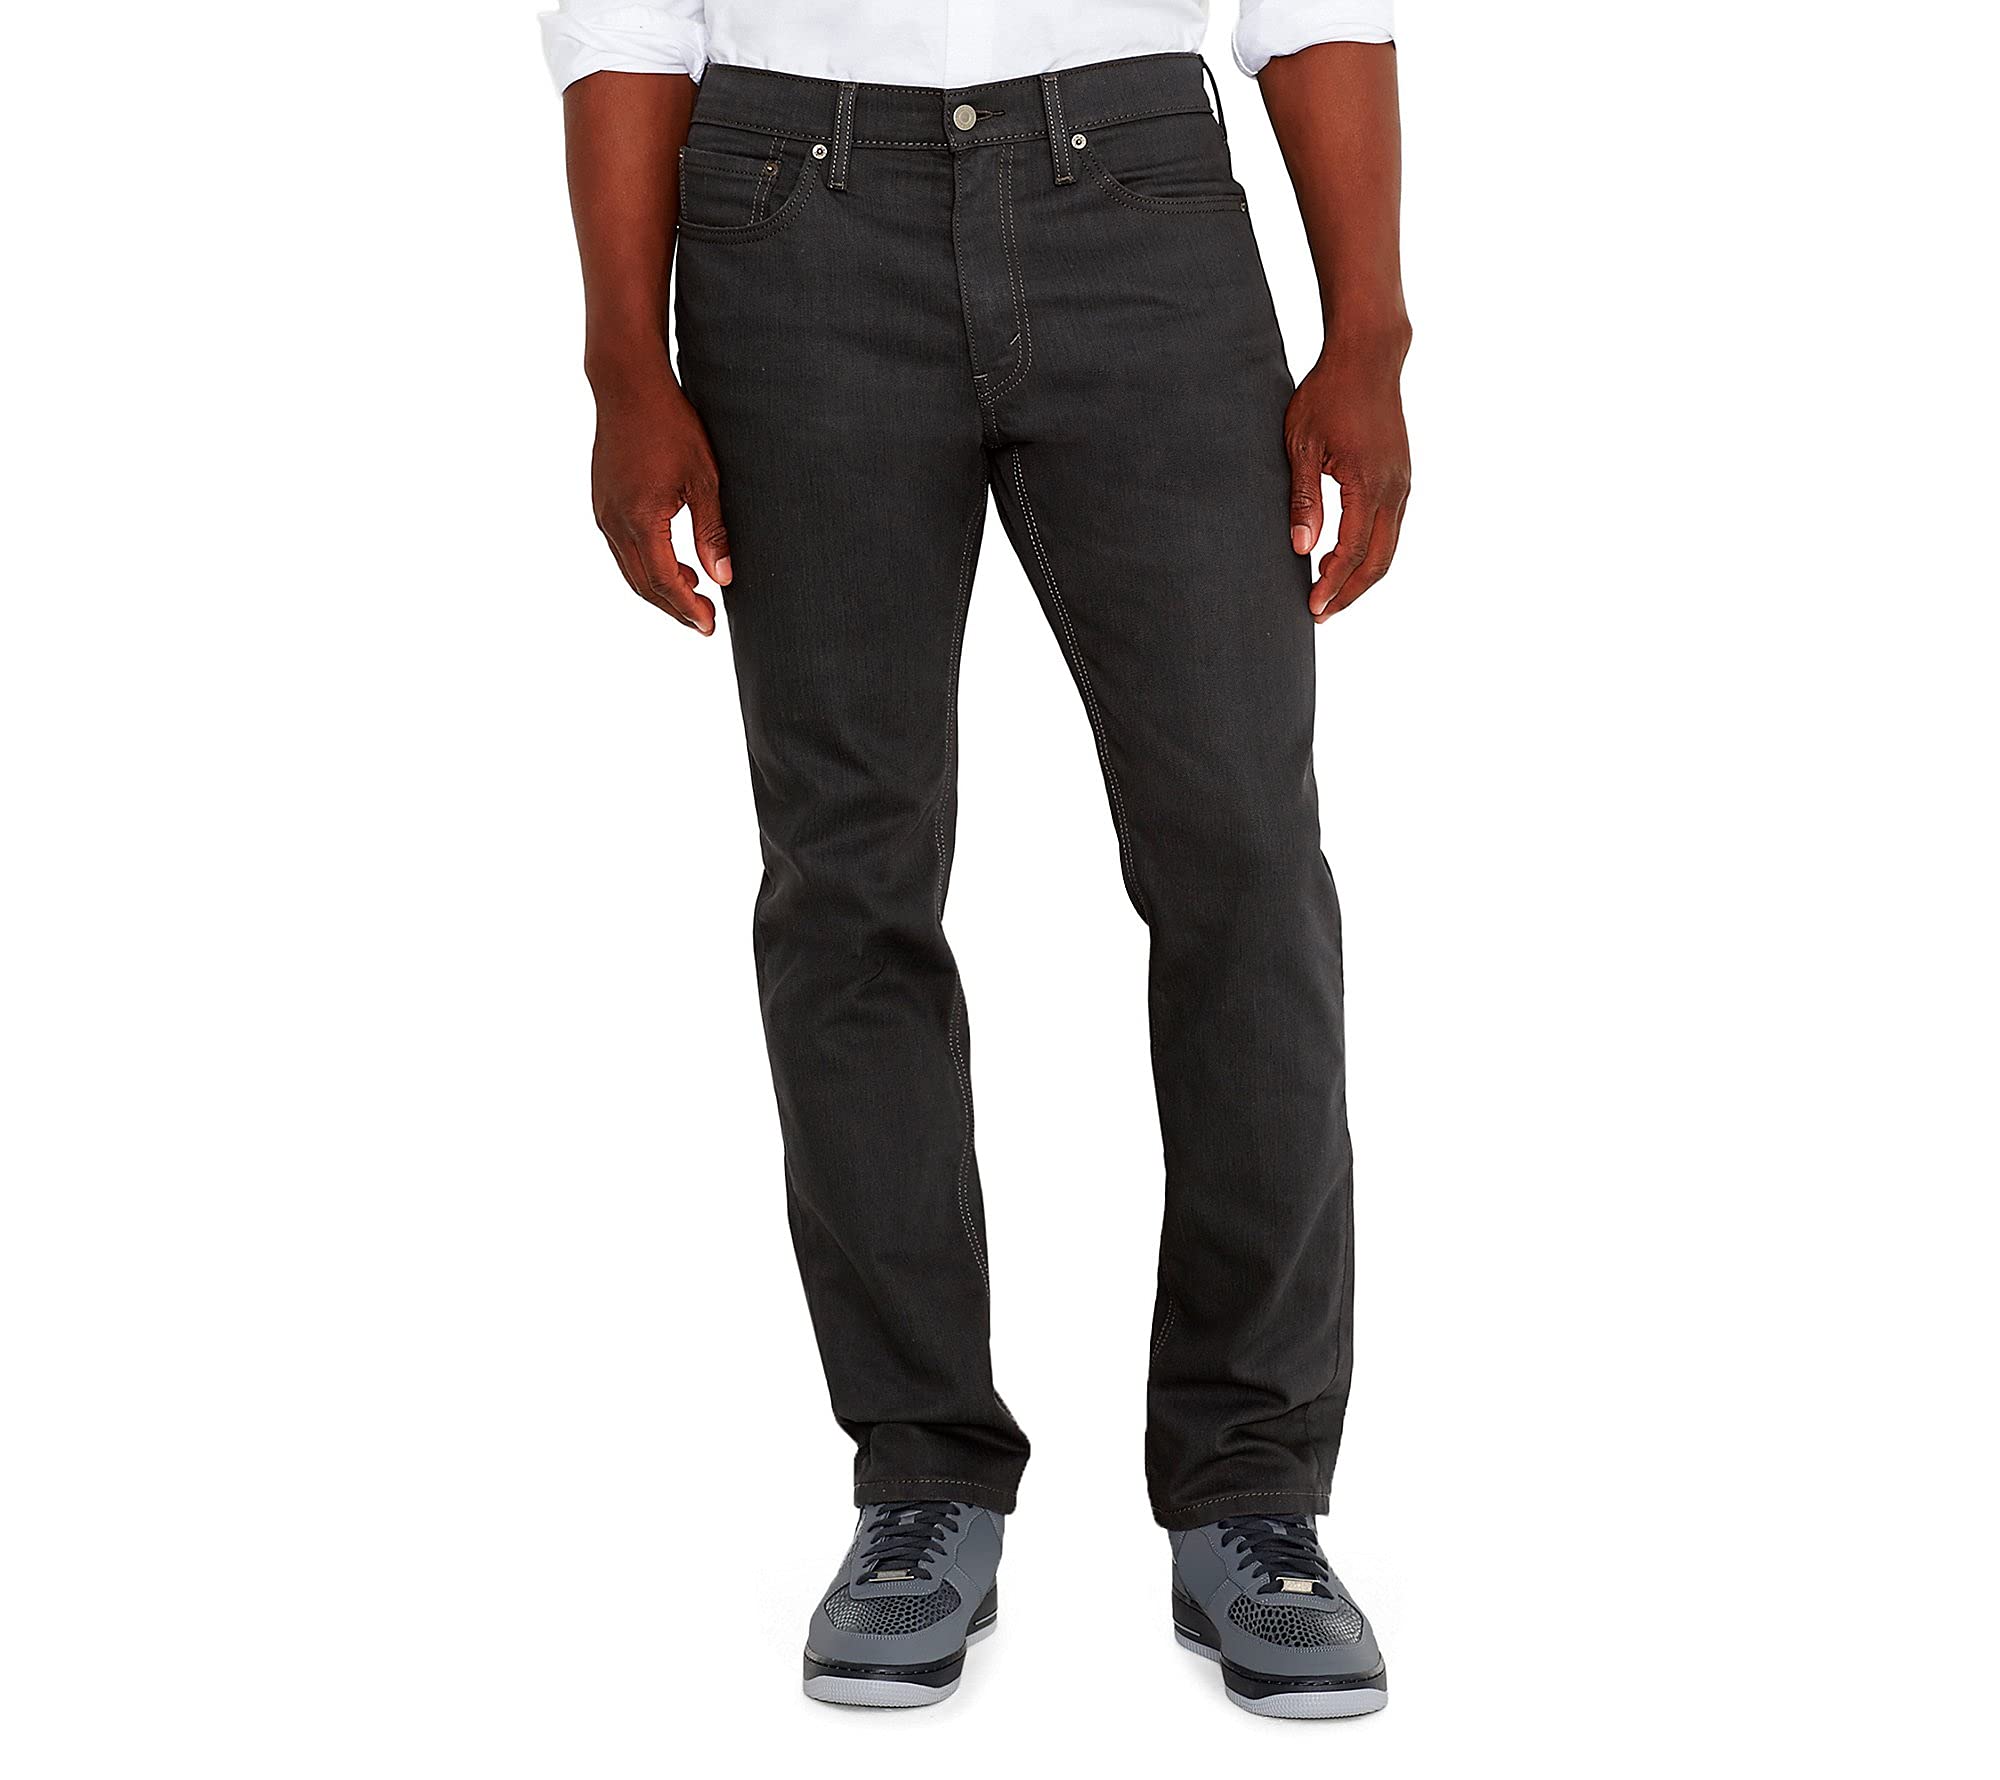 Levi's Men's 541 Athletic Fit Jean - Color: Stealth Stretch $15.90 @Amazon -YMMV limited size